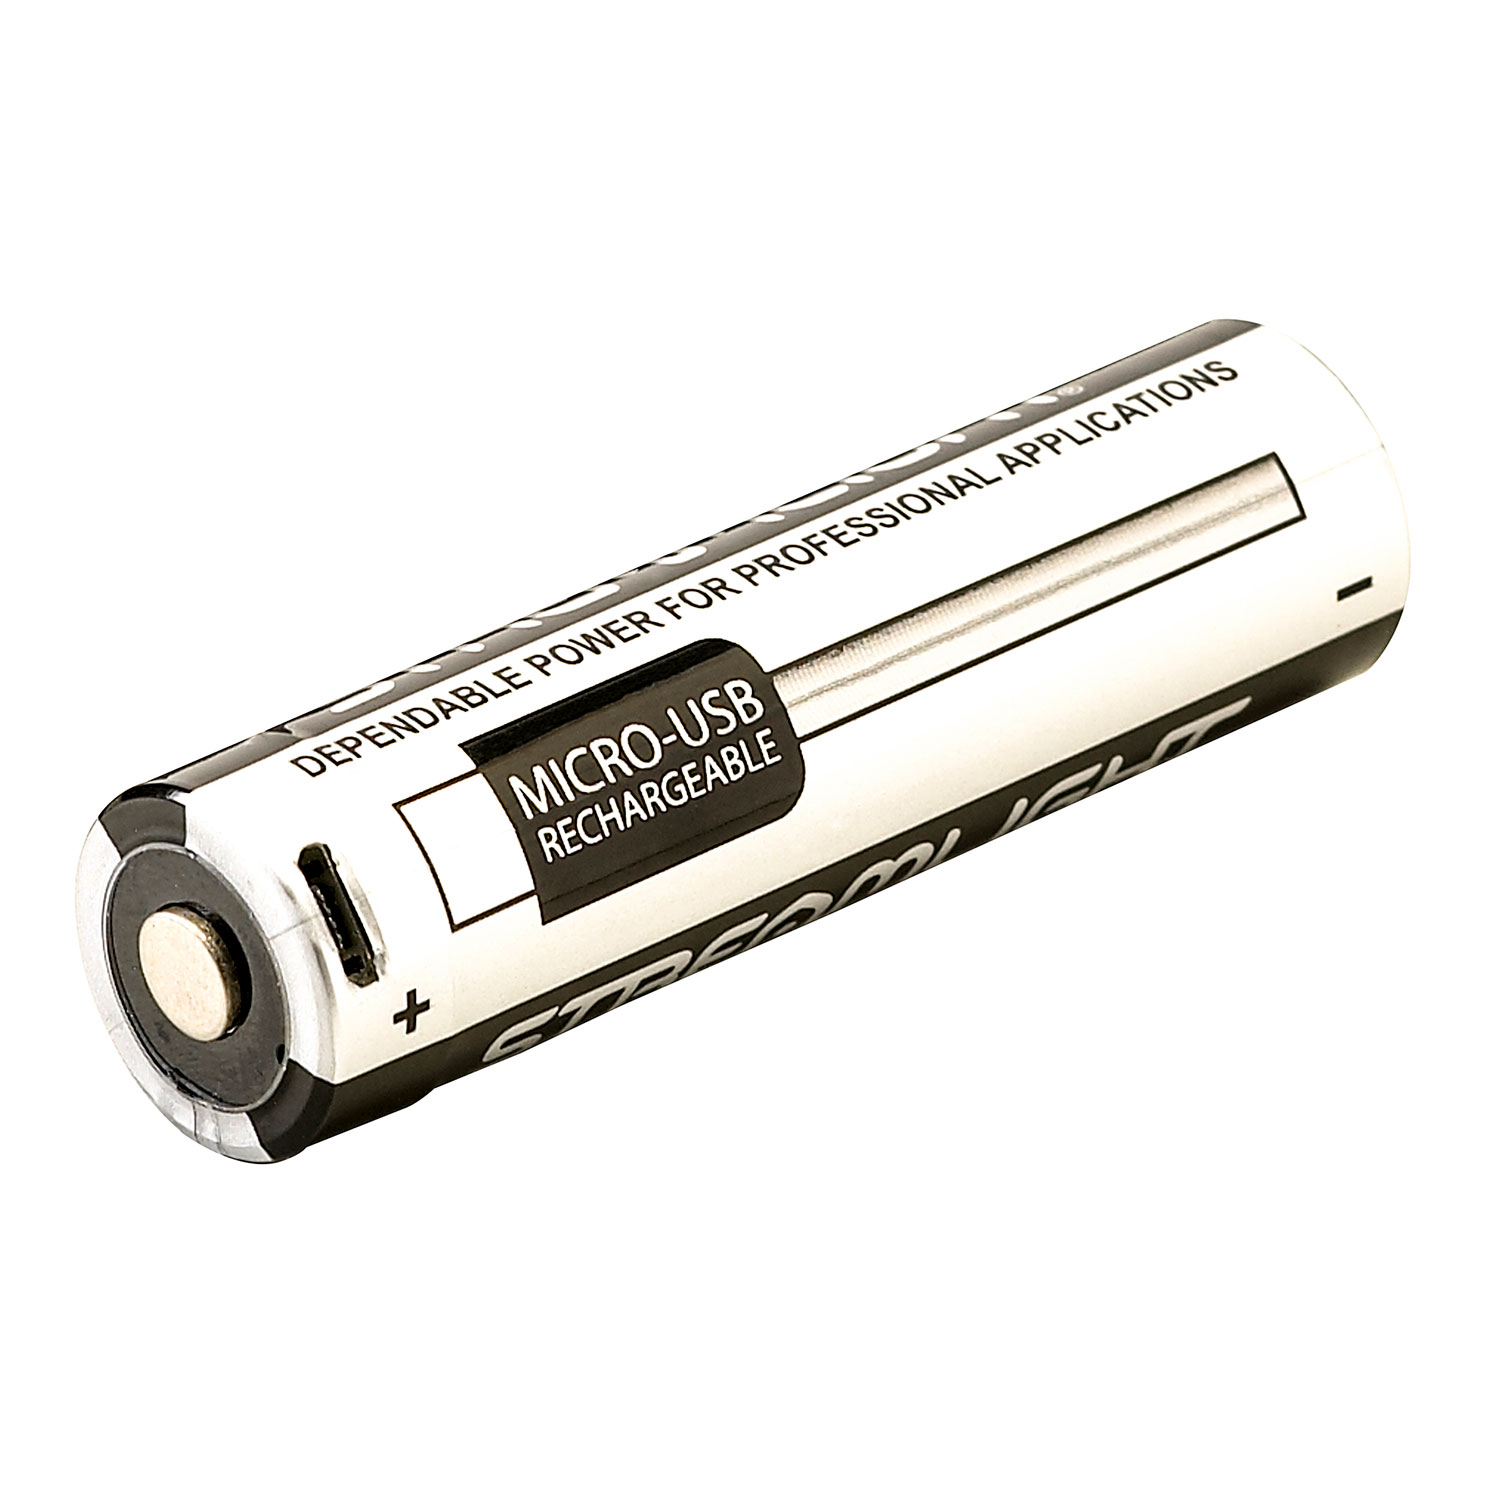 Streamlight USB 18650 Rechargeable Lithium Ion Battery (2pk)